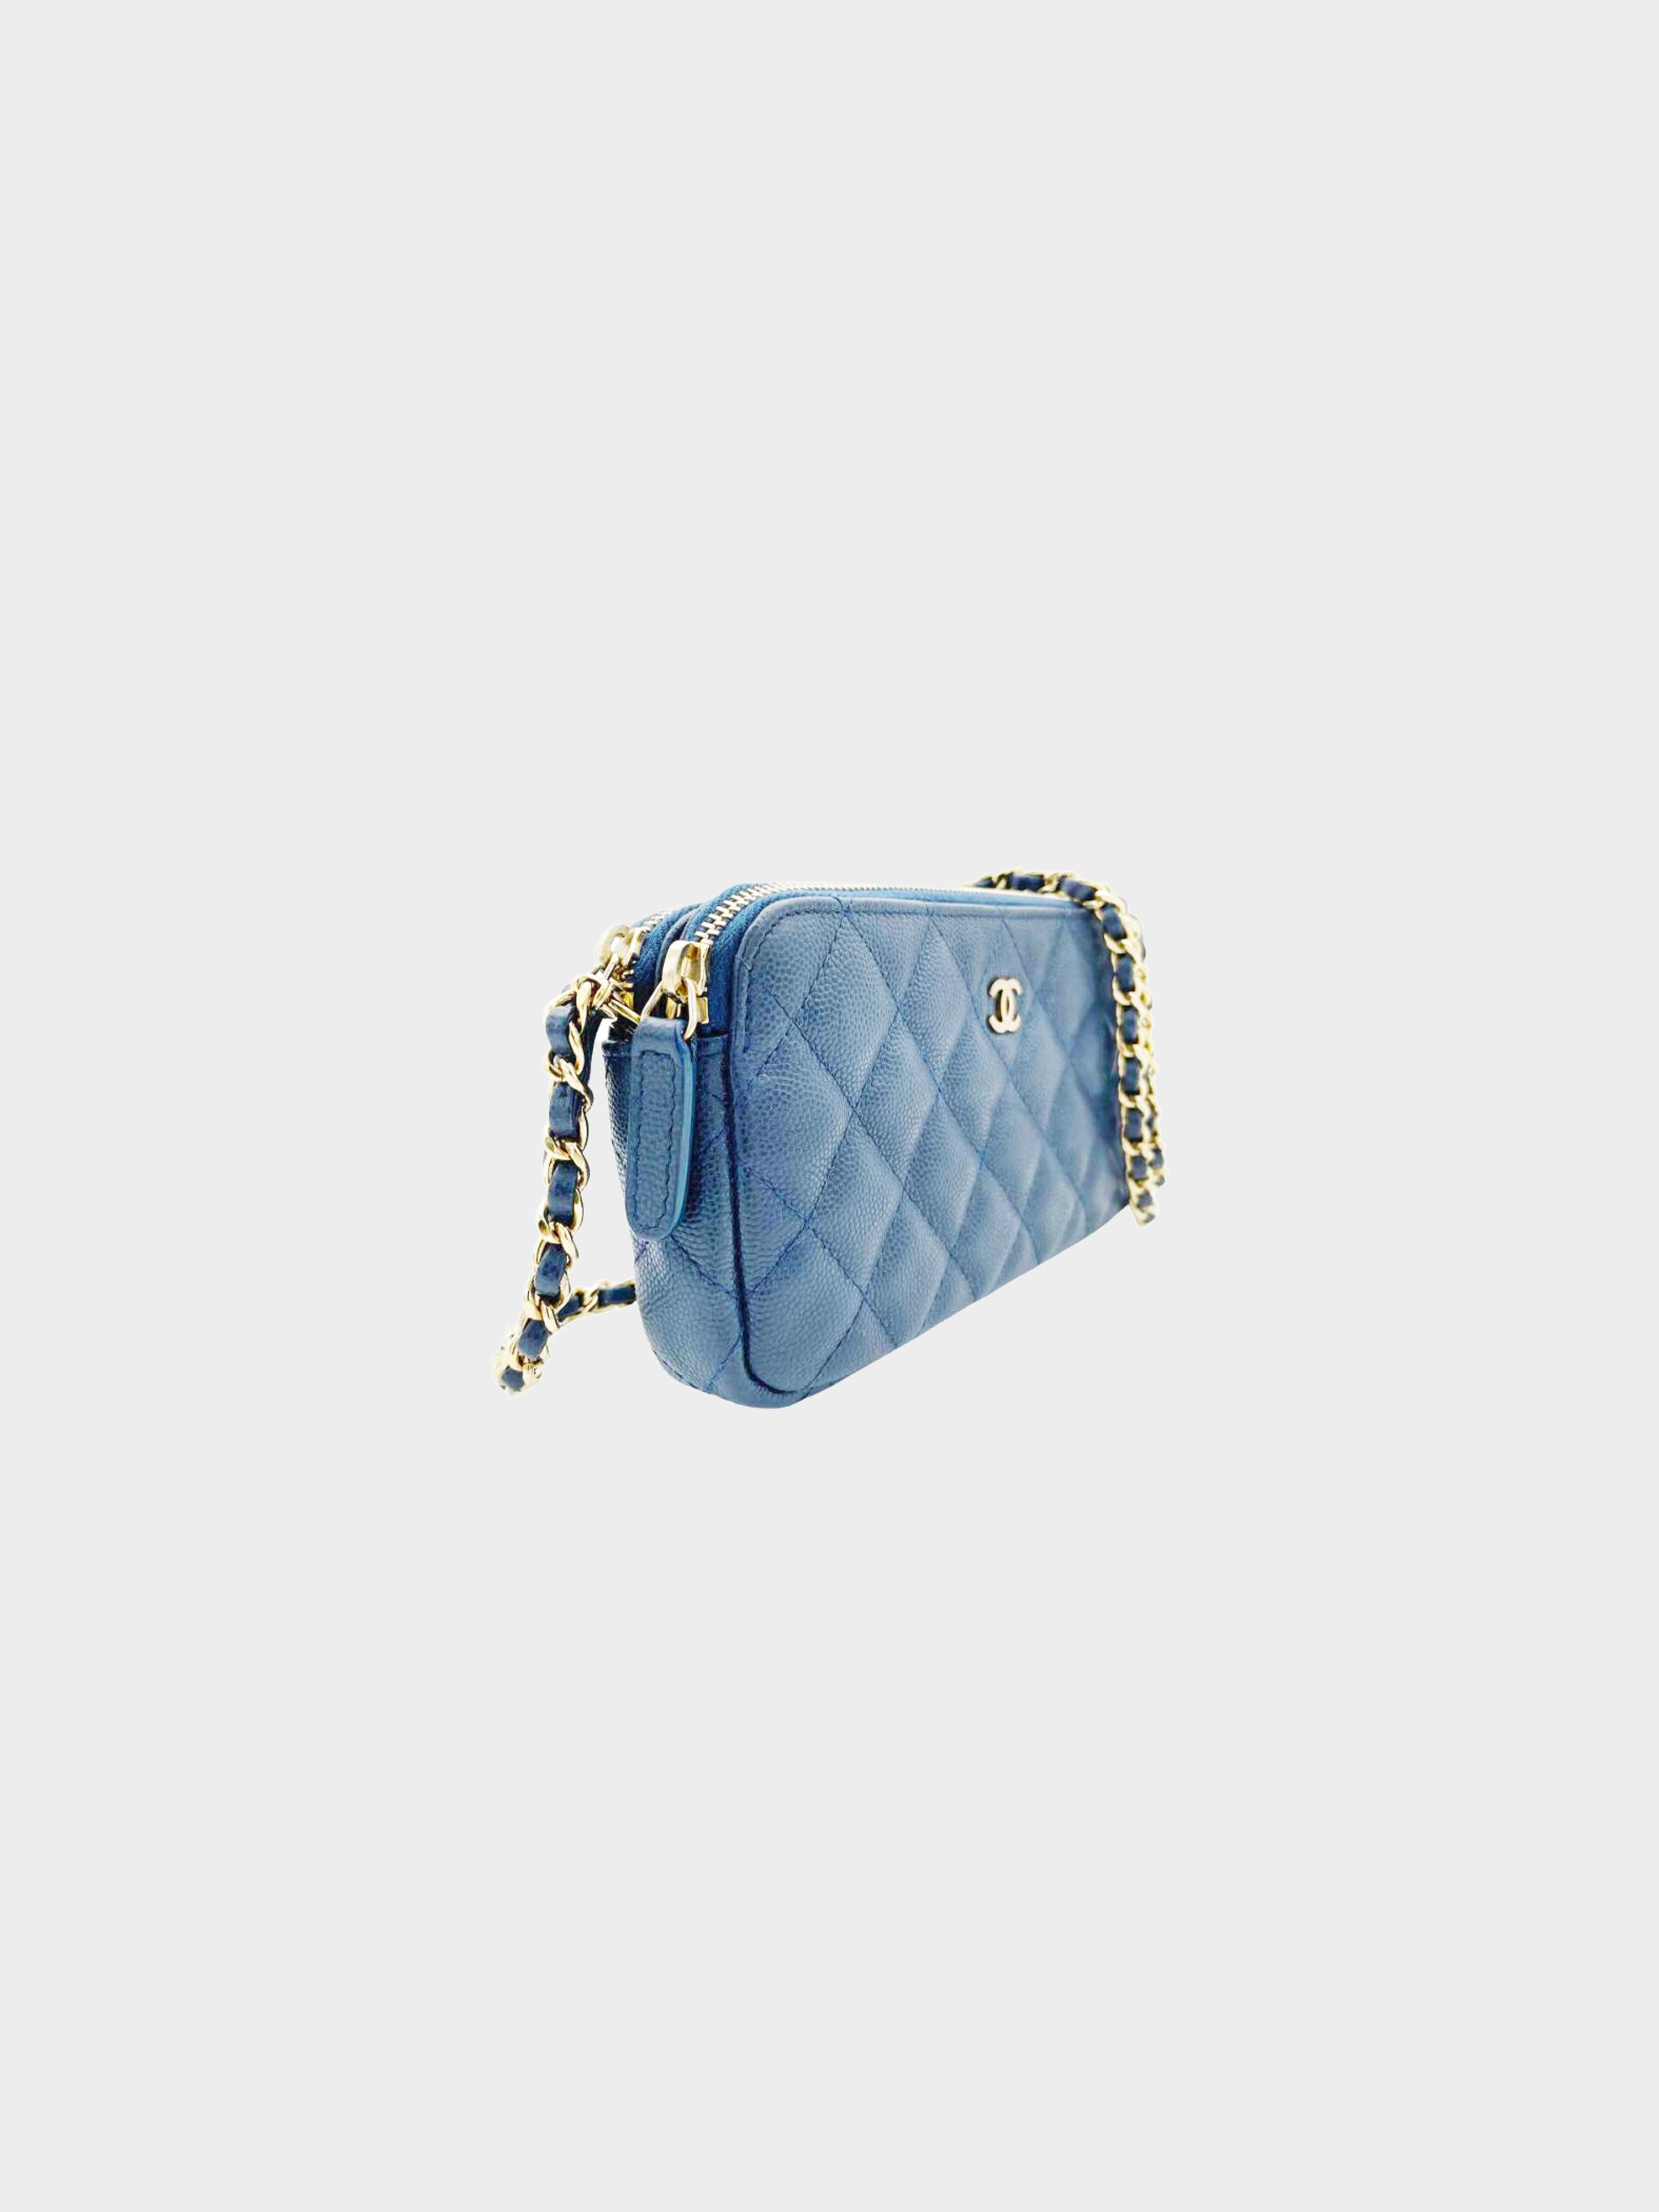 Double Zip Clutch with Chain Quilted Lambskin